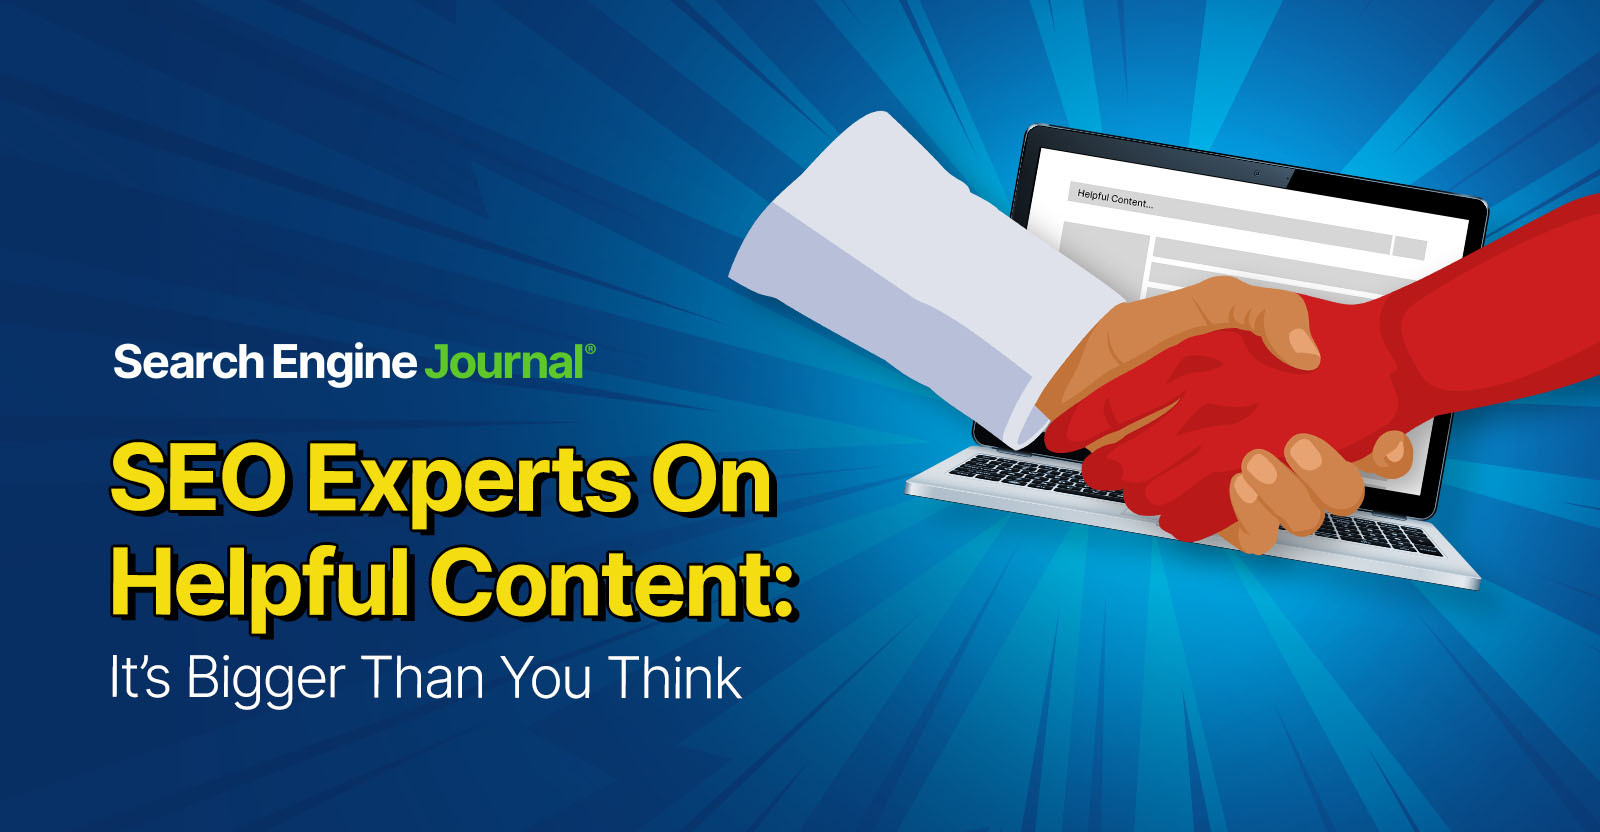 SEO Experts On Helpful Content: It’s Bigger Than You Think